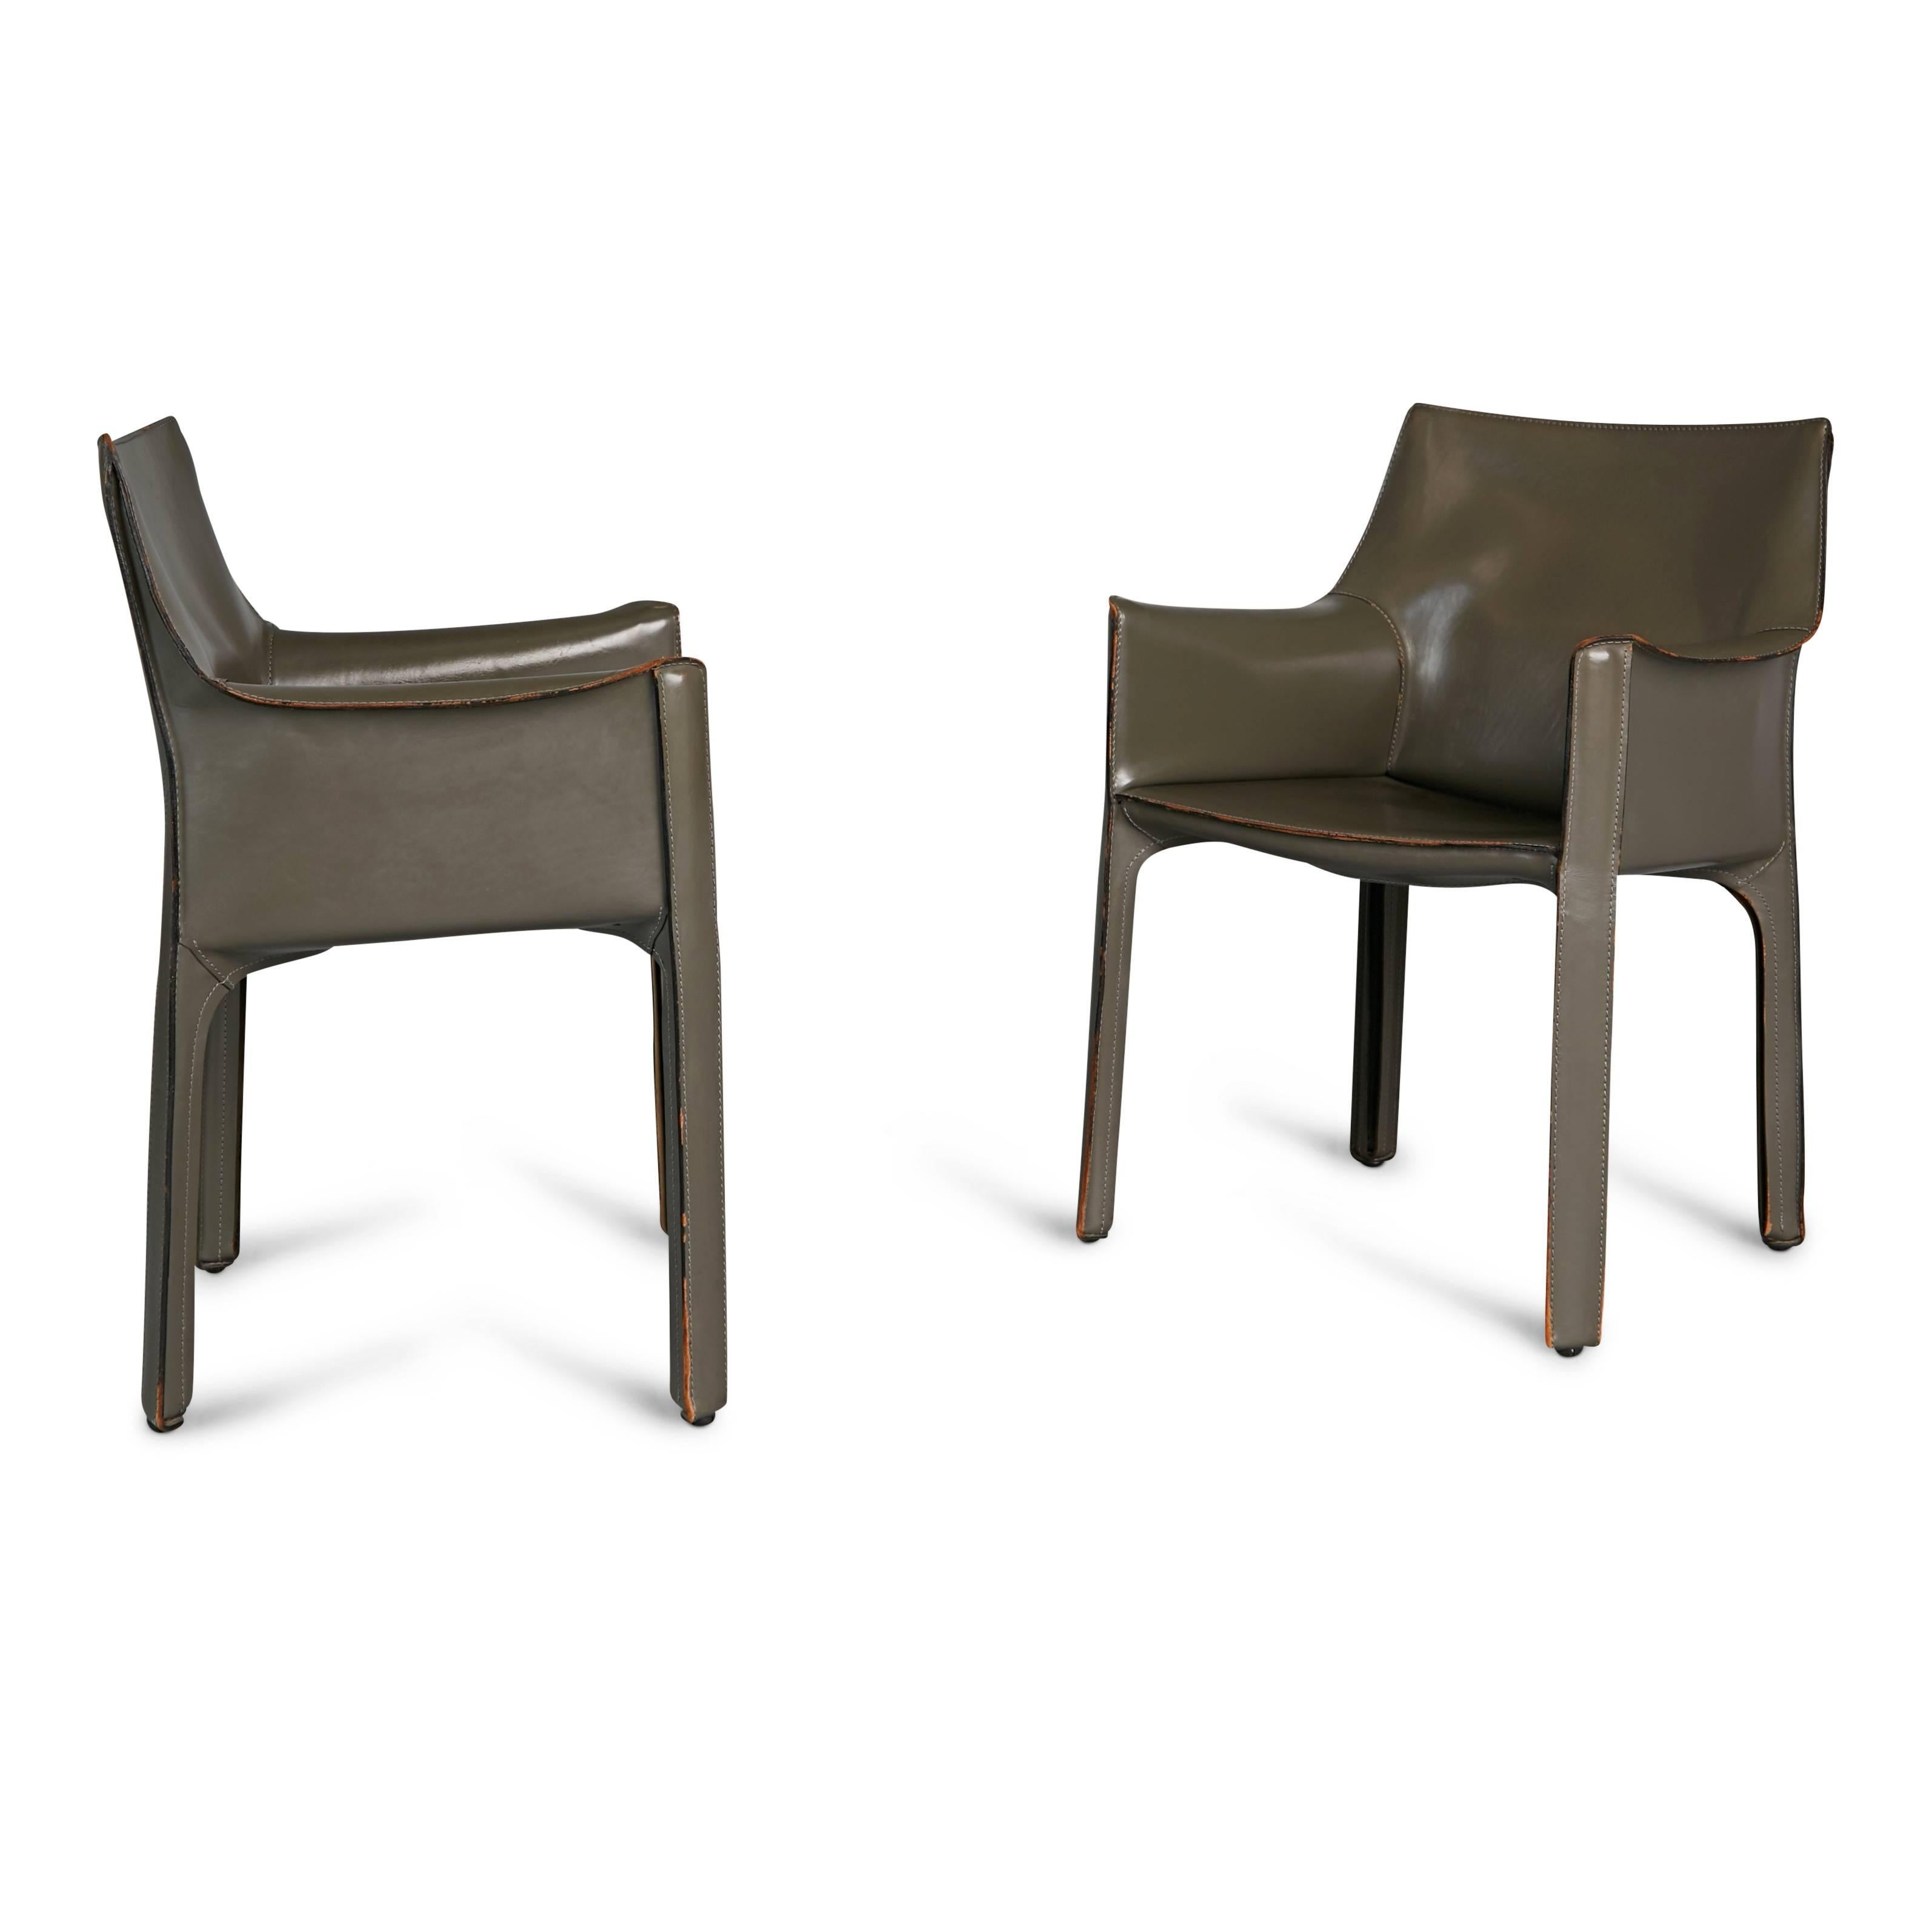 A rarer grey colored pair of Cab chairs designed by Mario Bellini for Cassina, with beautiful patina to the high-quality Italian leather. Originally conceived in 1977 these armchairs are comprised of enameled steel frames, padded with polyurethane